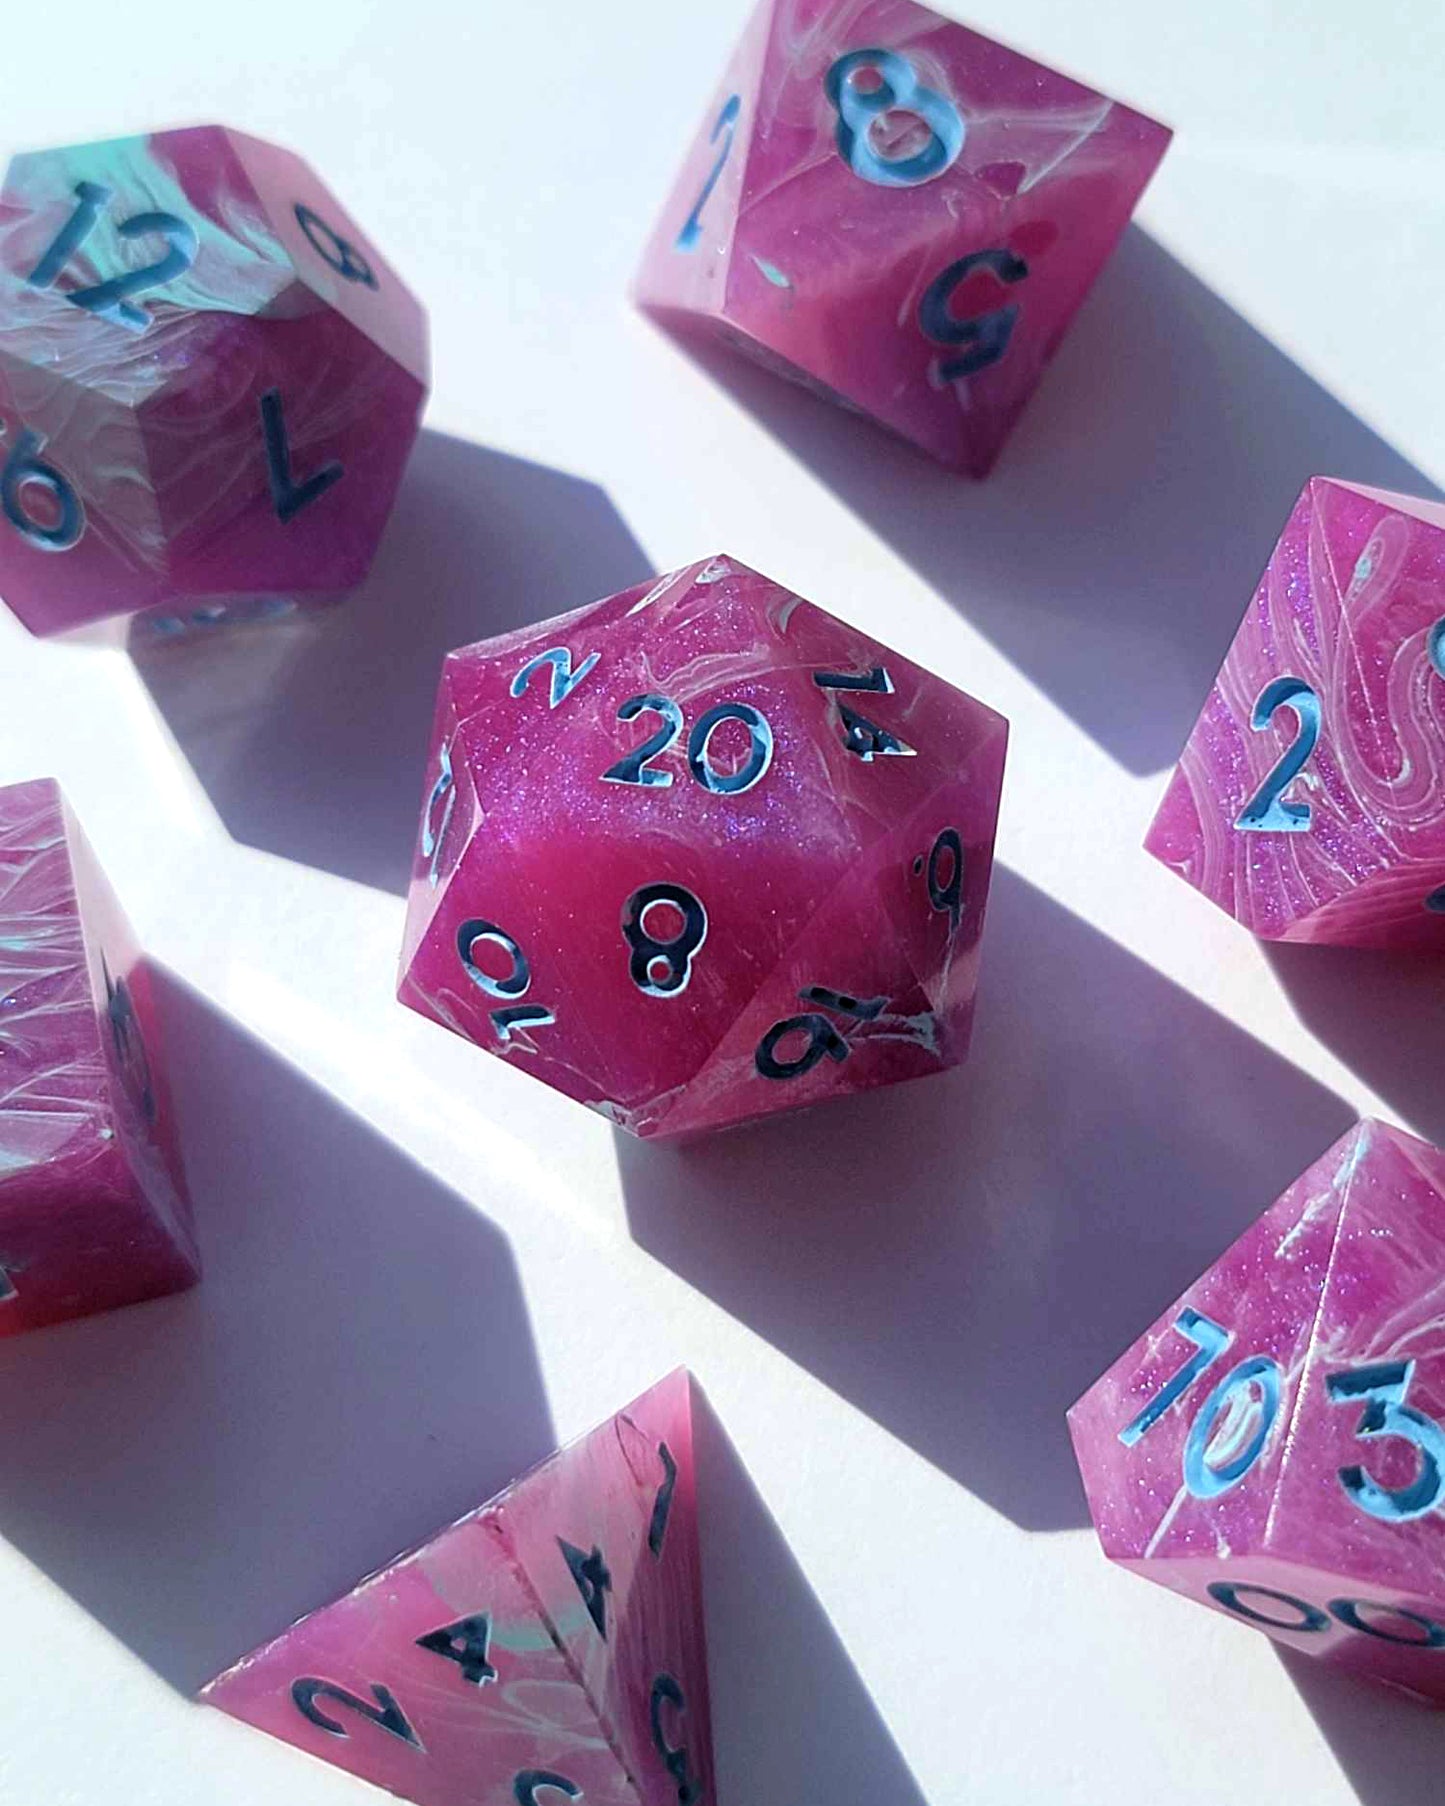 Bardic Dream - 7 Piece handmade D&D Dice| Hand Crafted Dungeons and Dragons Dice